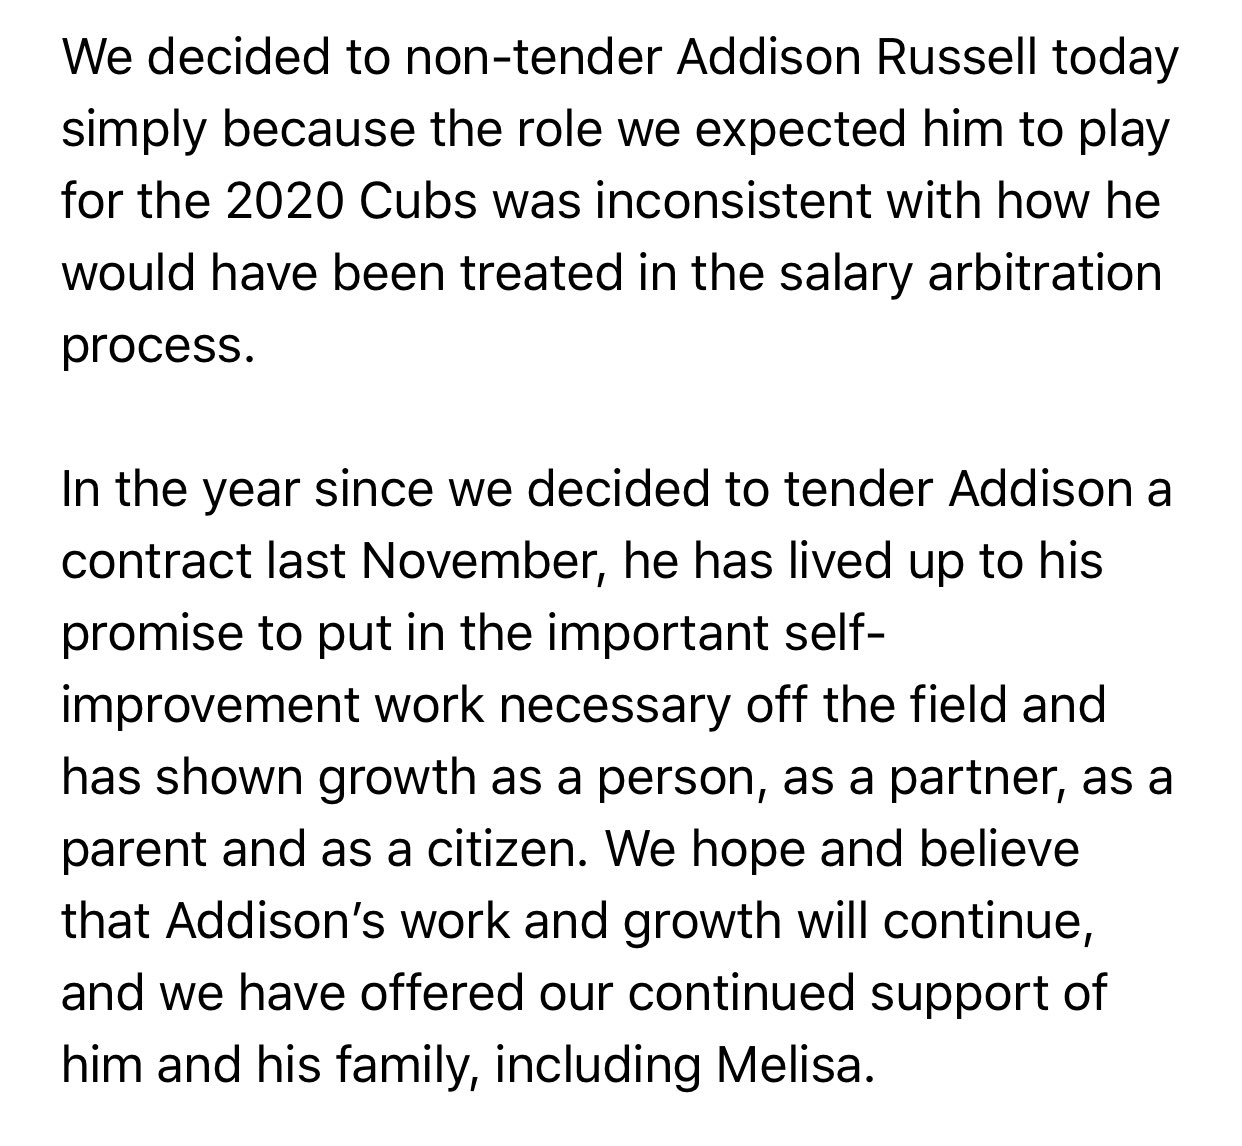 Kelly Crull on Twitter: Comments from Theo Epstein regarding